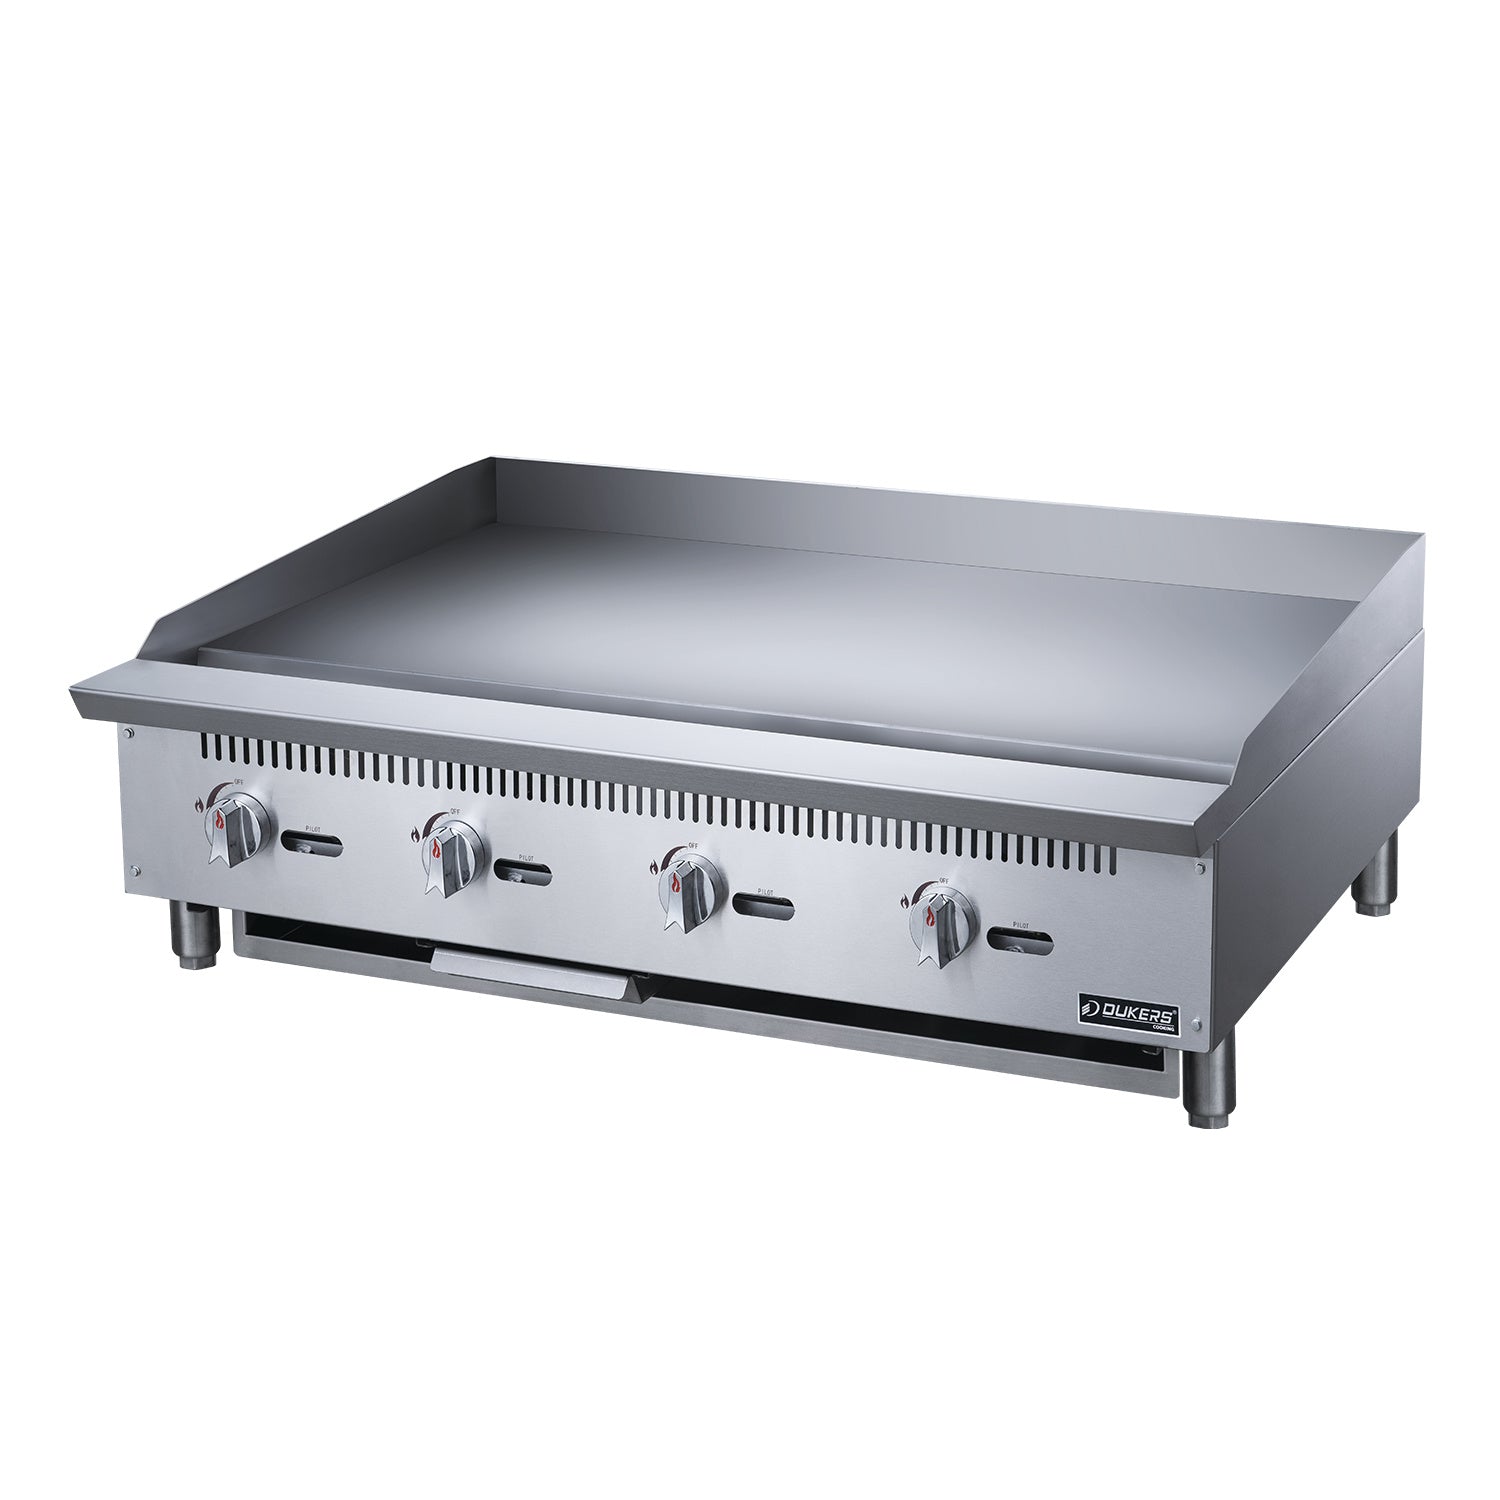 48" Griddler (24" Depth) 4-Burner Commercial Griddle in Stainless Steel with 4 legs commercial flat top griddle with three control knobs and a manufacturer's logo on the front, designed for use as a natural gas griddle.